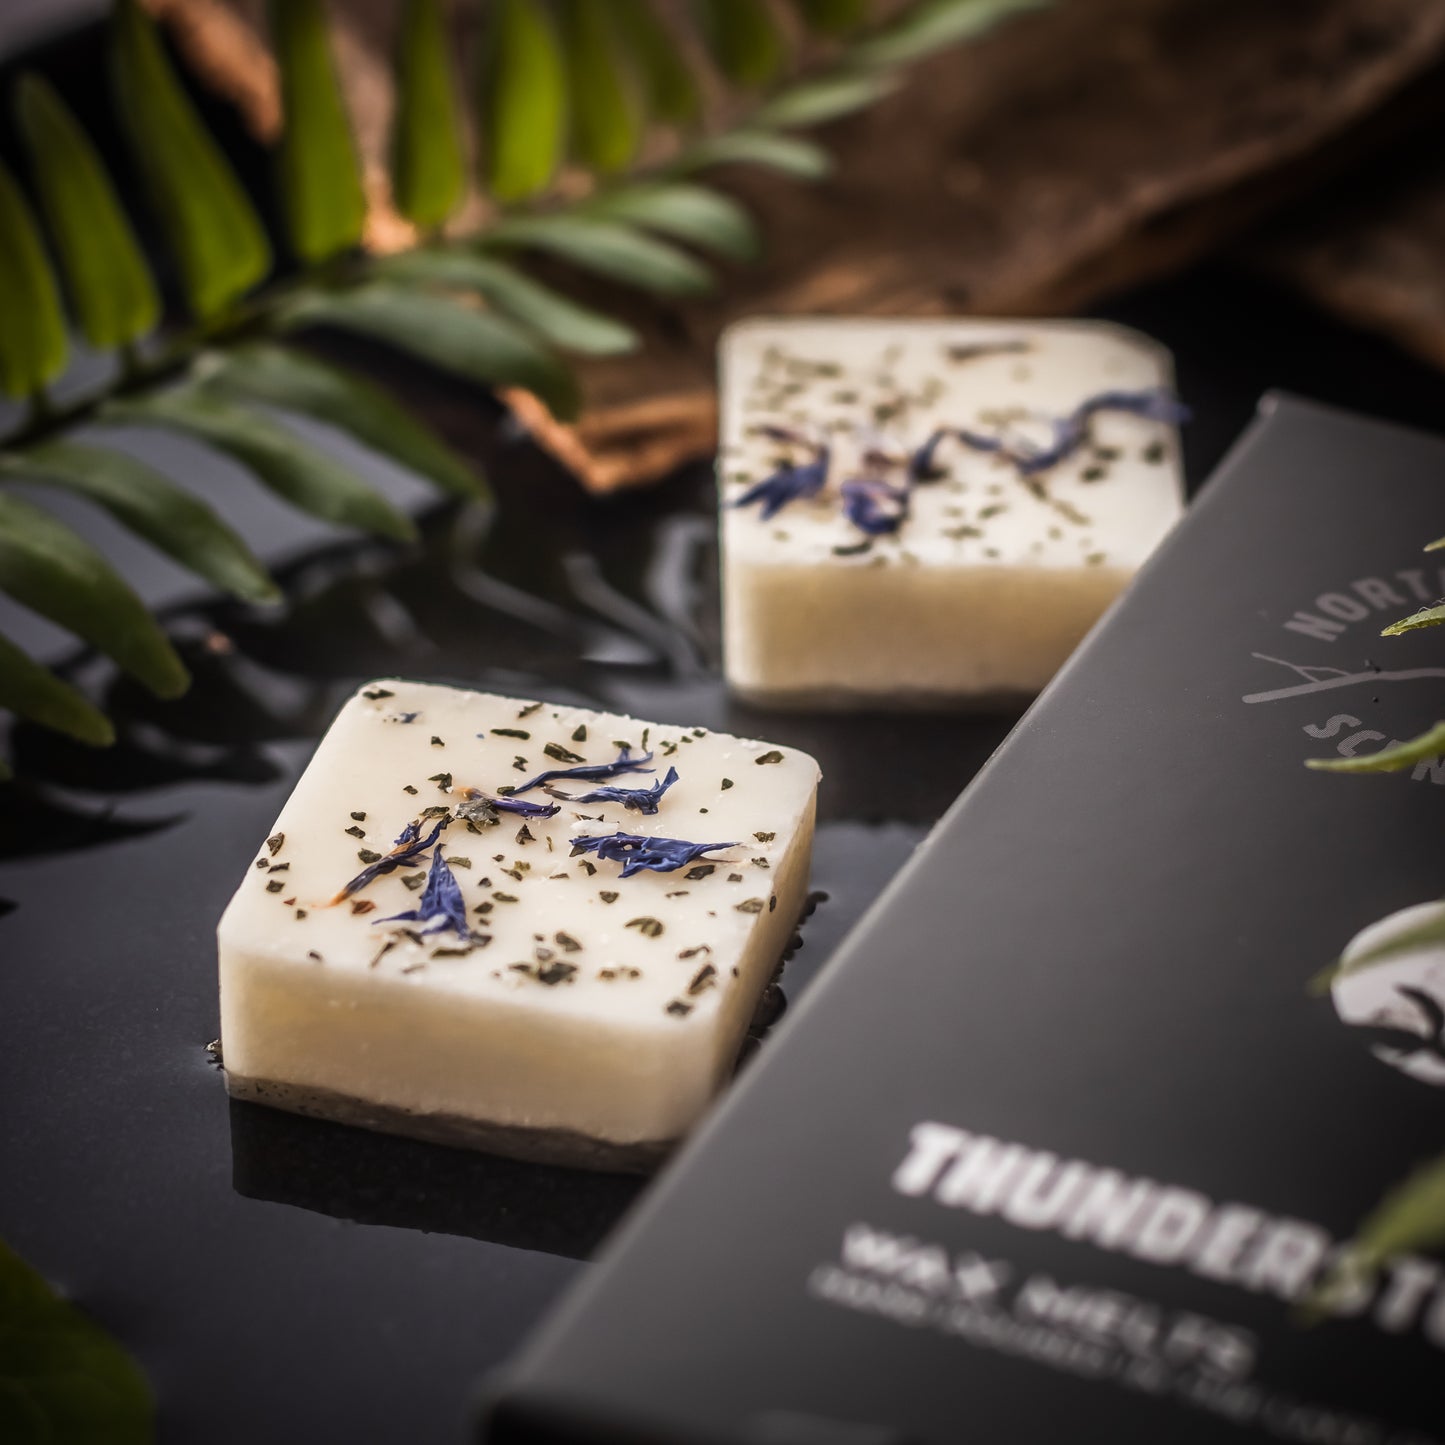 Petrichor scented wax melts. Experience the invigorating scent of petrichor, electrifying ozone, and the atmospheric ambiance of thunderstorms. Transform your space into a mesmerizing stormy haven with these evocative wax melts.